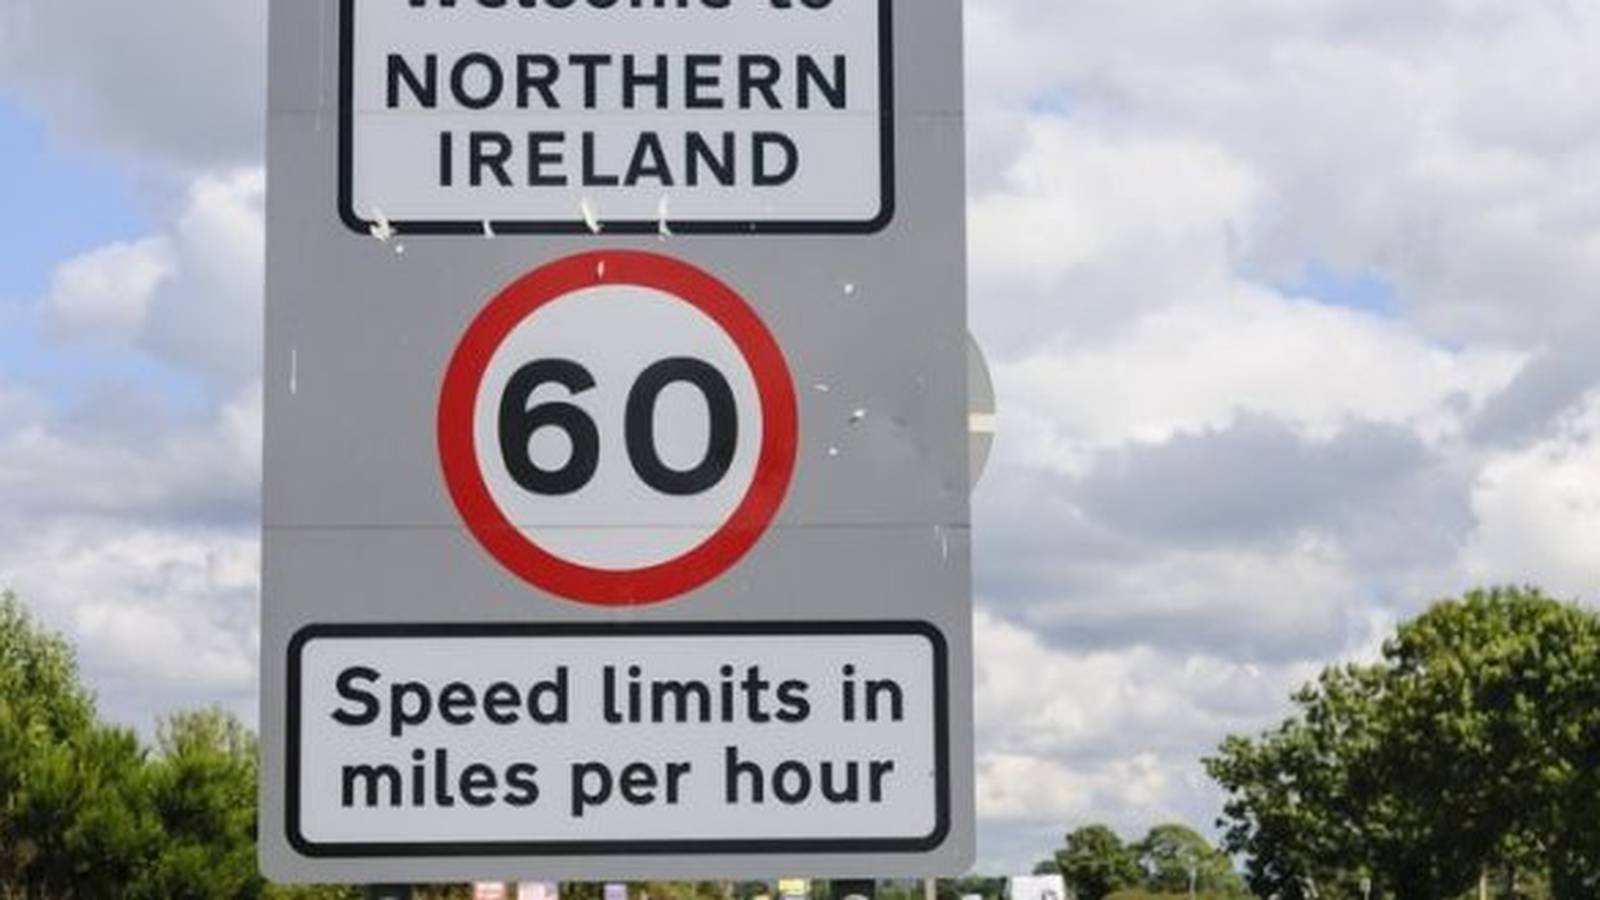 Poll and pictures: What do you think of Northern Ireland's brand